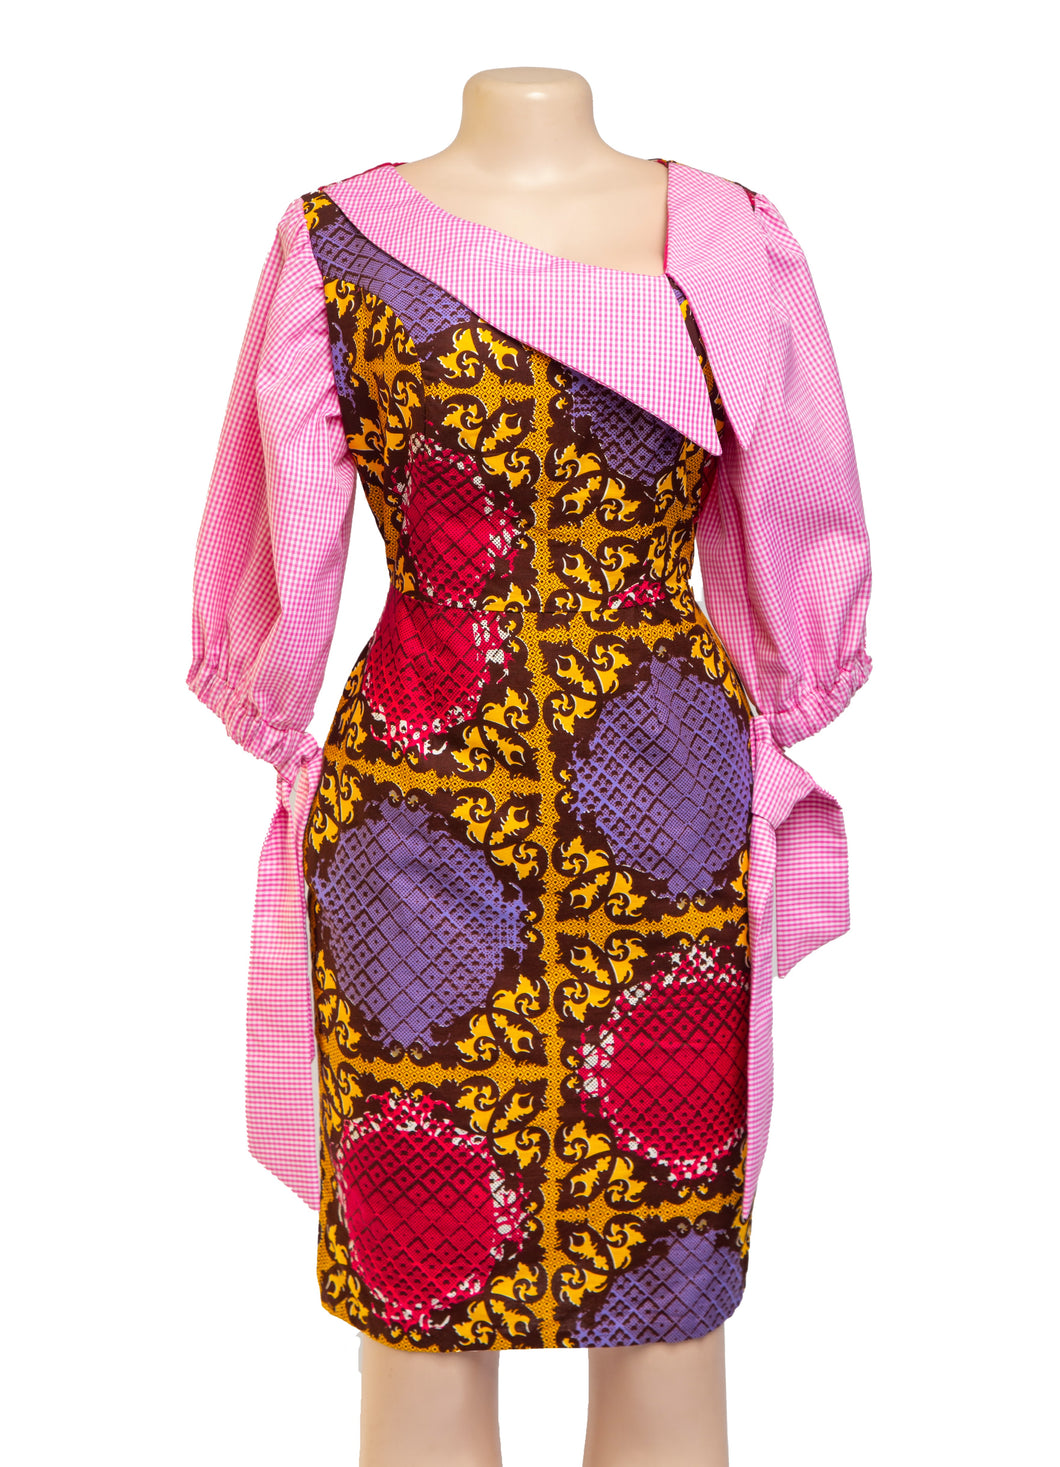 CHECKYWAX - African print wax print dress with checked sleeve